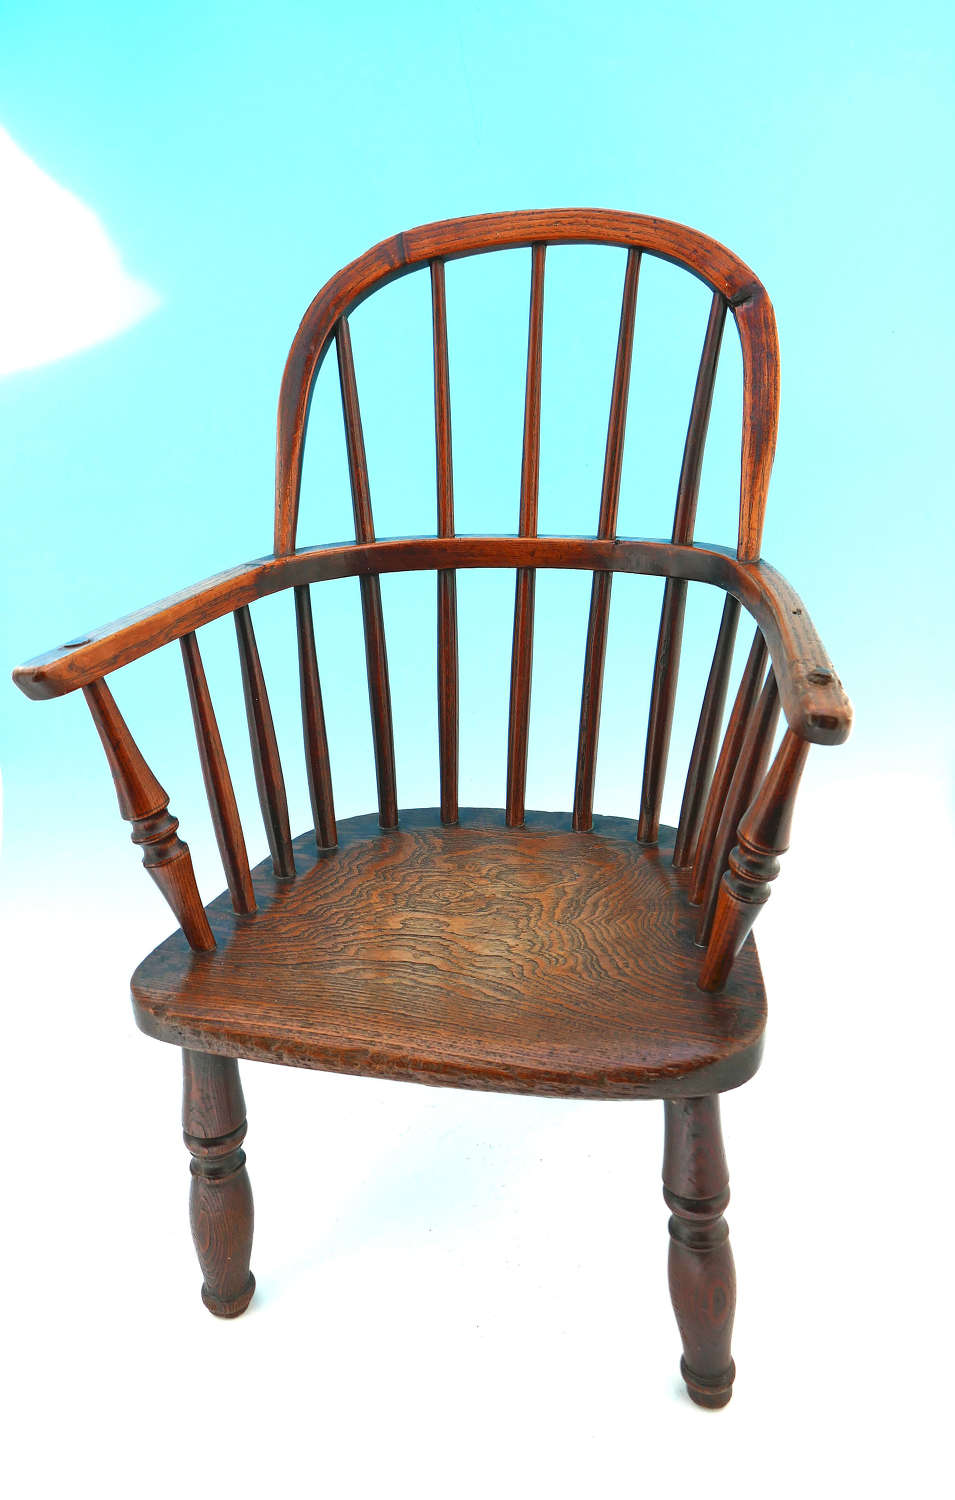 Antique 19thc Country Furniture Windsor Stick Back Child's Chair.